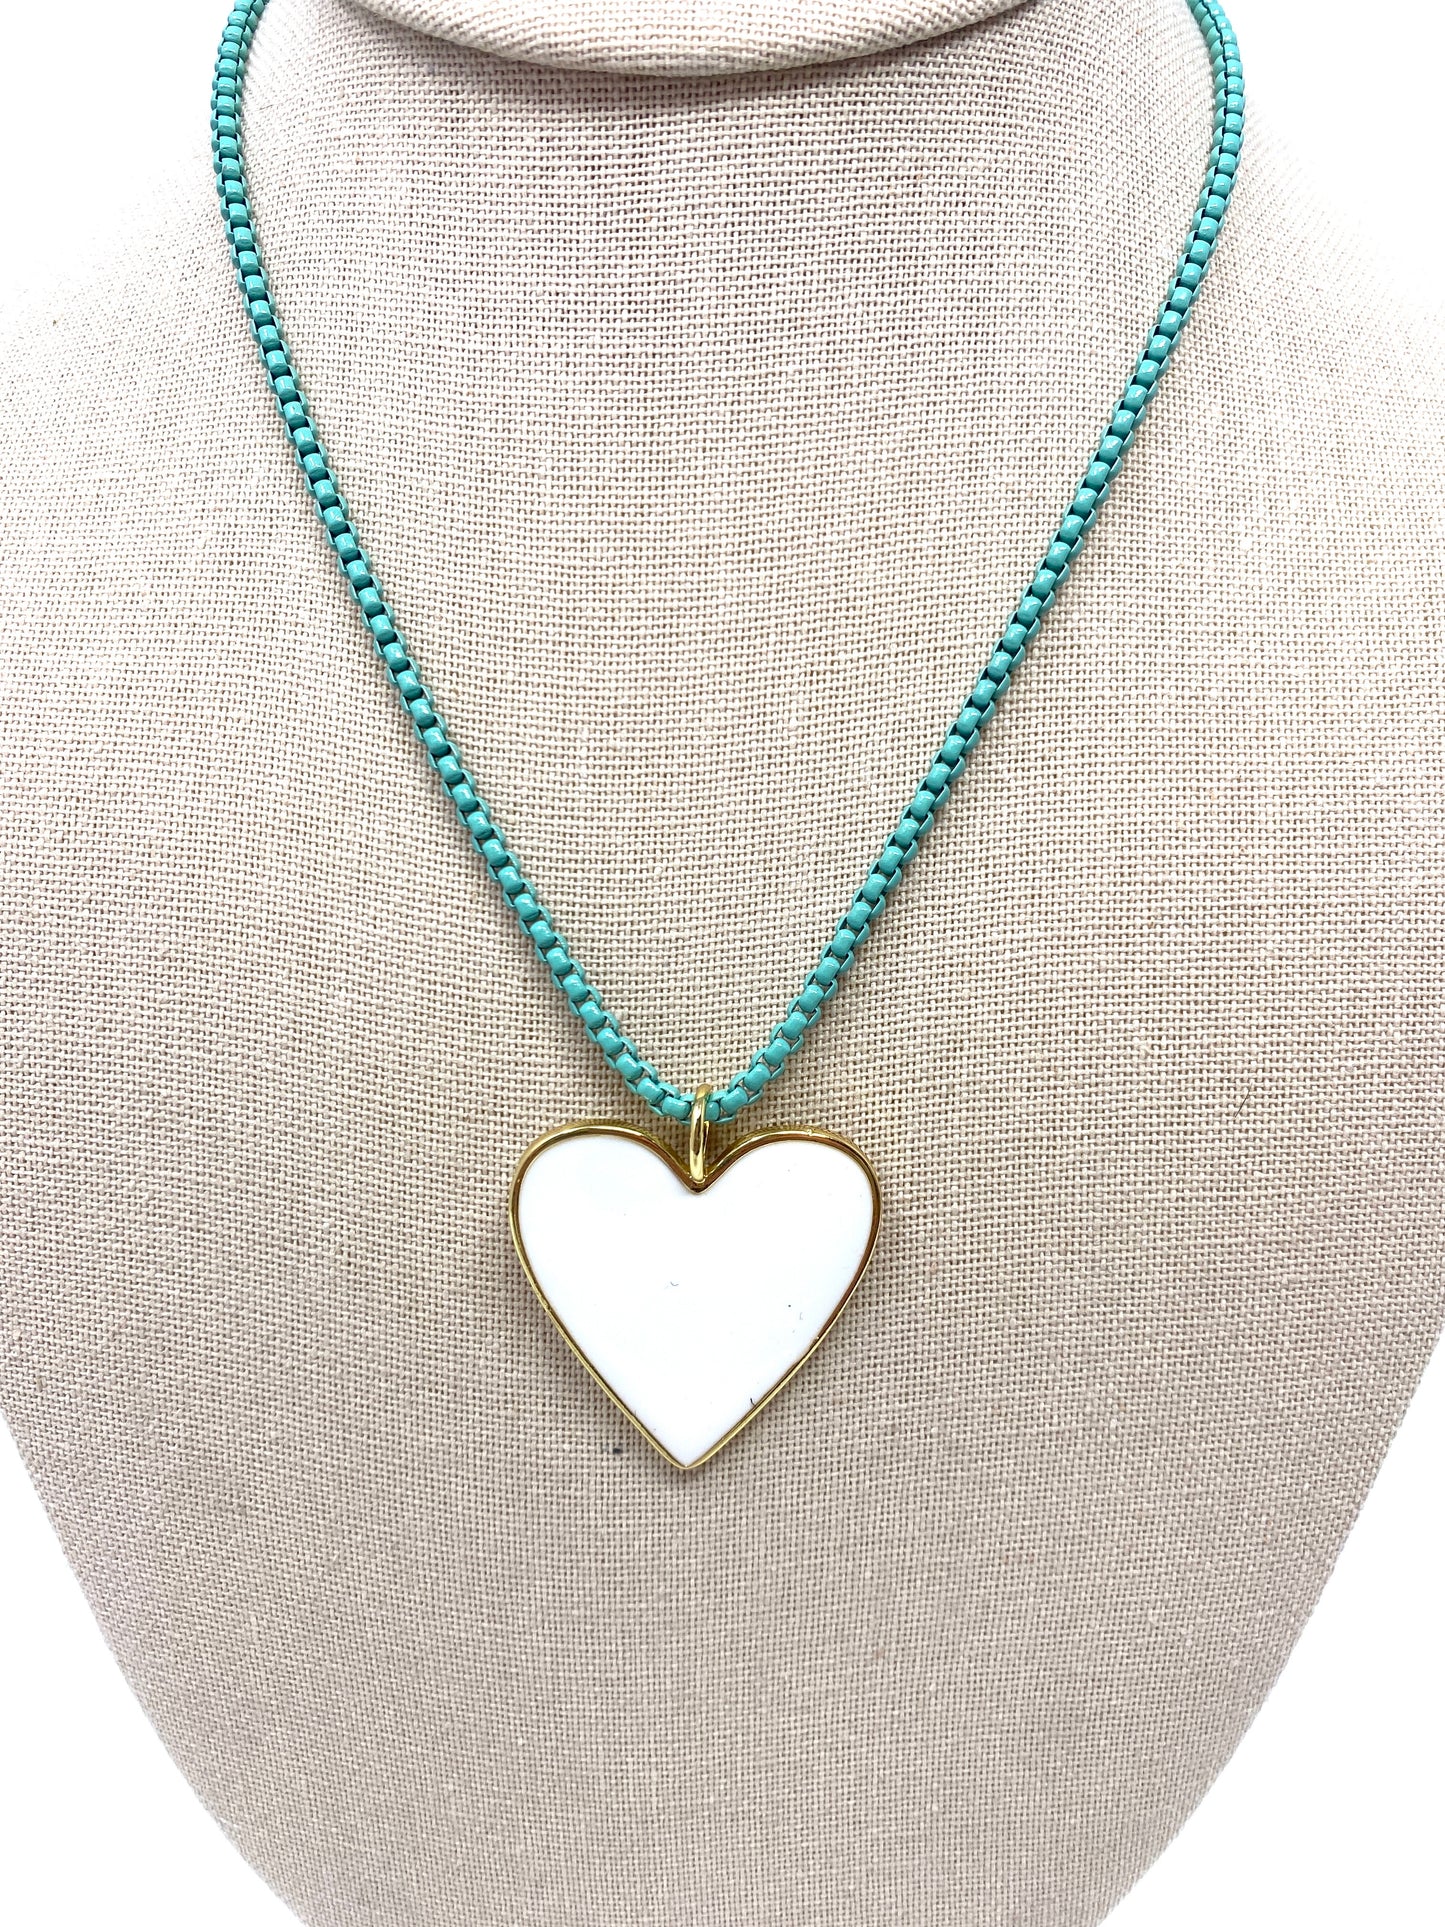 Green Turquoise Enamel Box Chain Necklace With Large White Enamel Heart Pendant